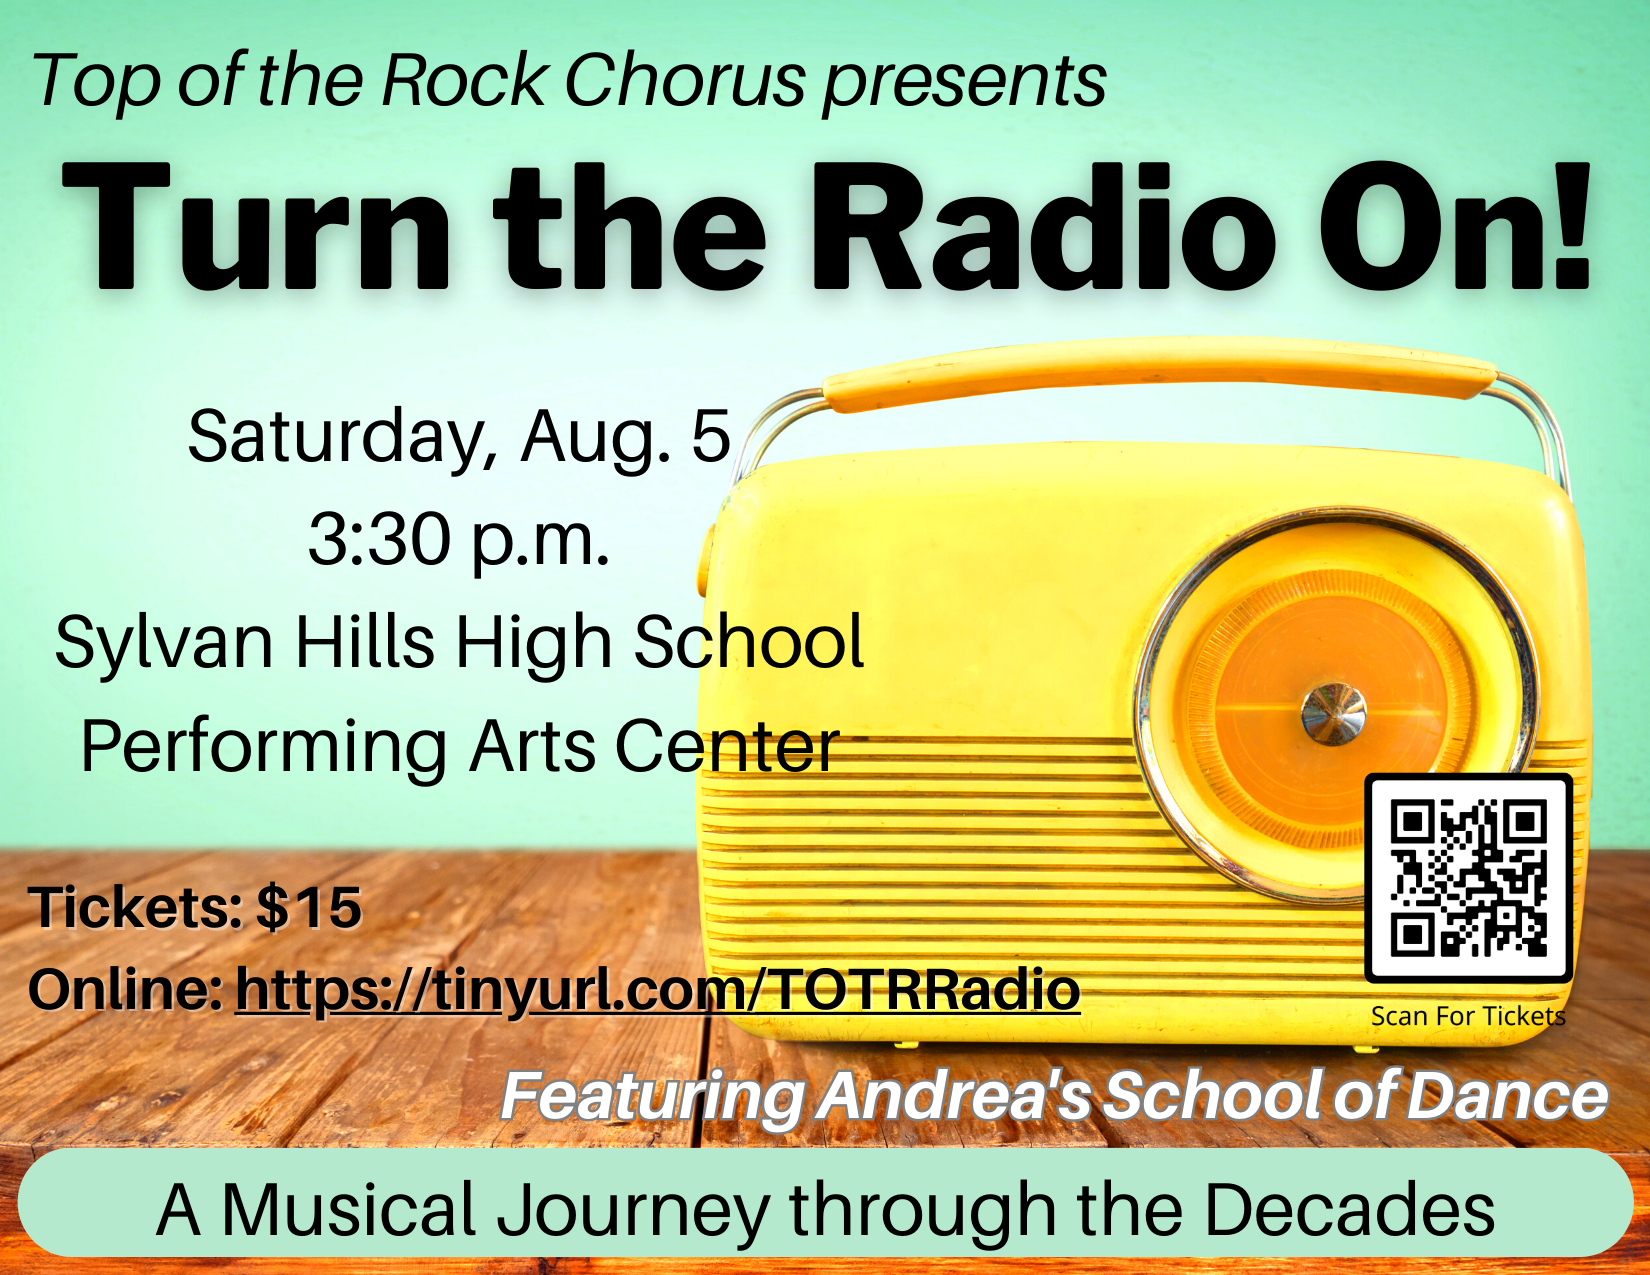 Top of the Rock Chorus Invites You To ‘Turn the Radio On’ on Aug. 5